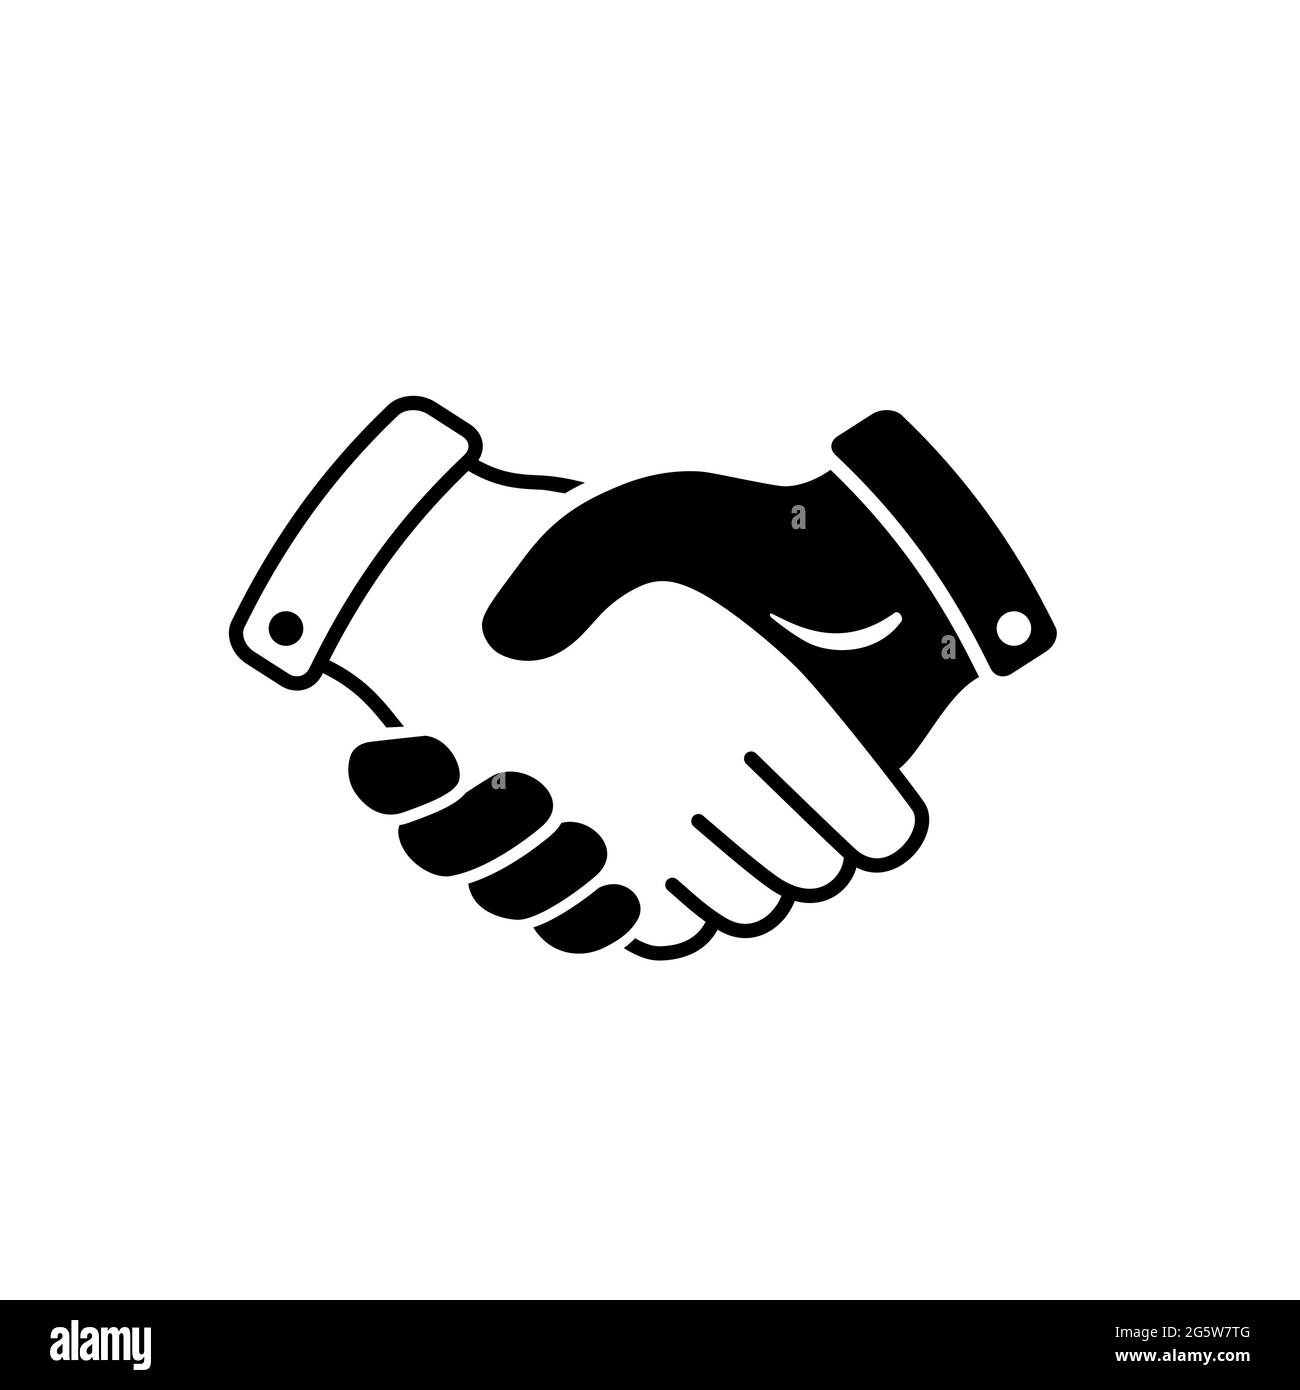 Vector handshake line art icon, sign. Business contract, agreement symbol. Line drawing, black and white illustration. Stock Vector